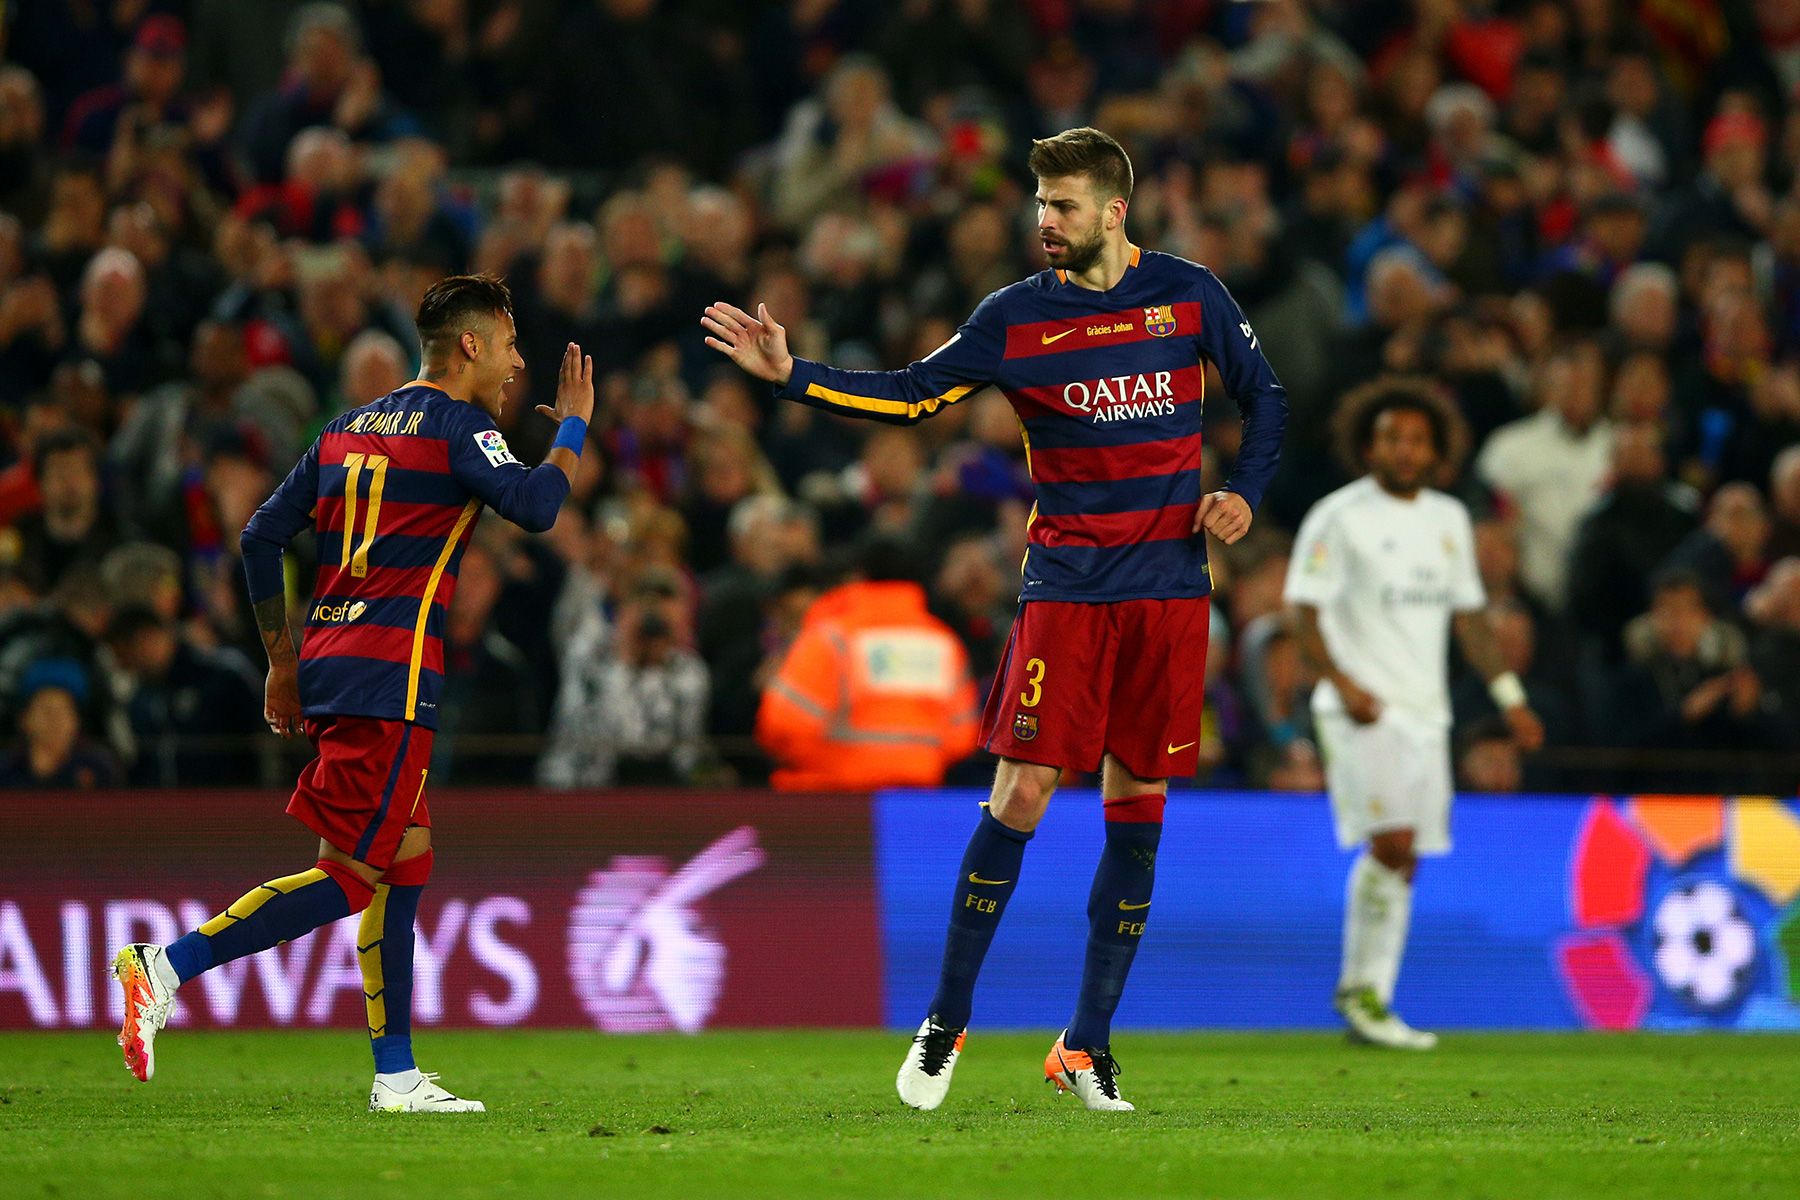 Neymar and Pique celebrate a goal with Barcelona